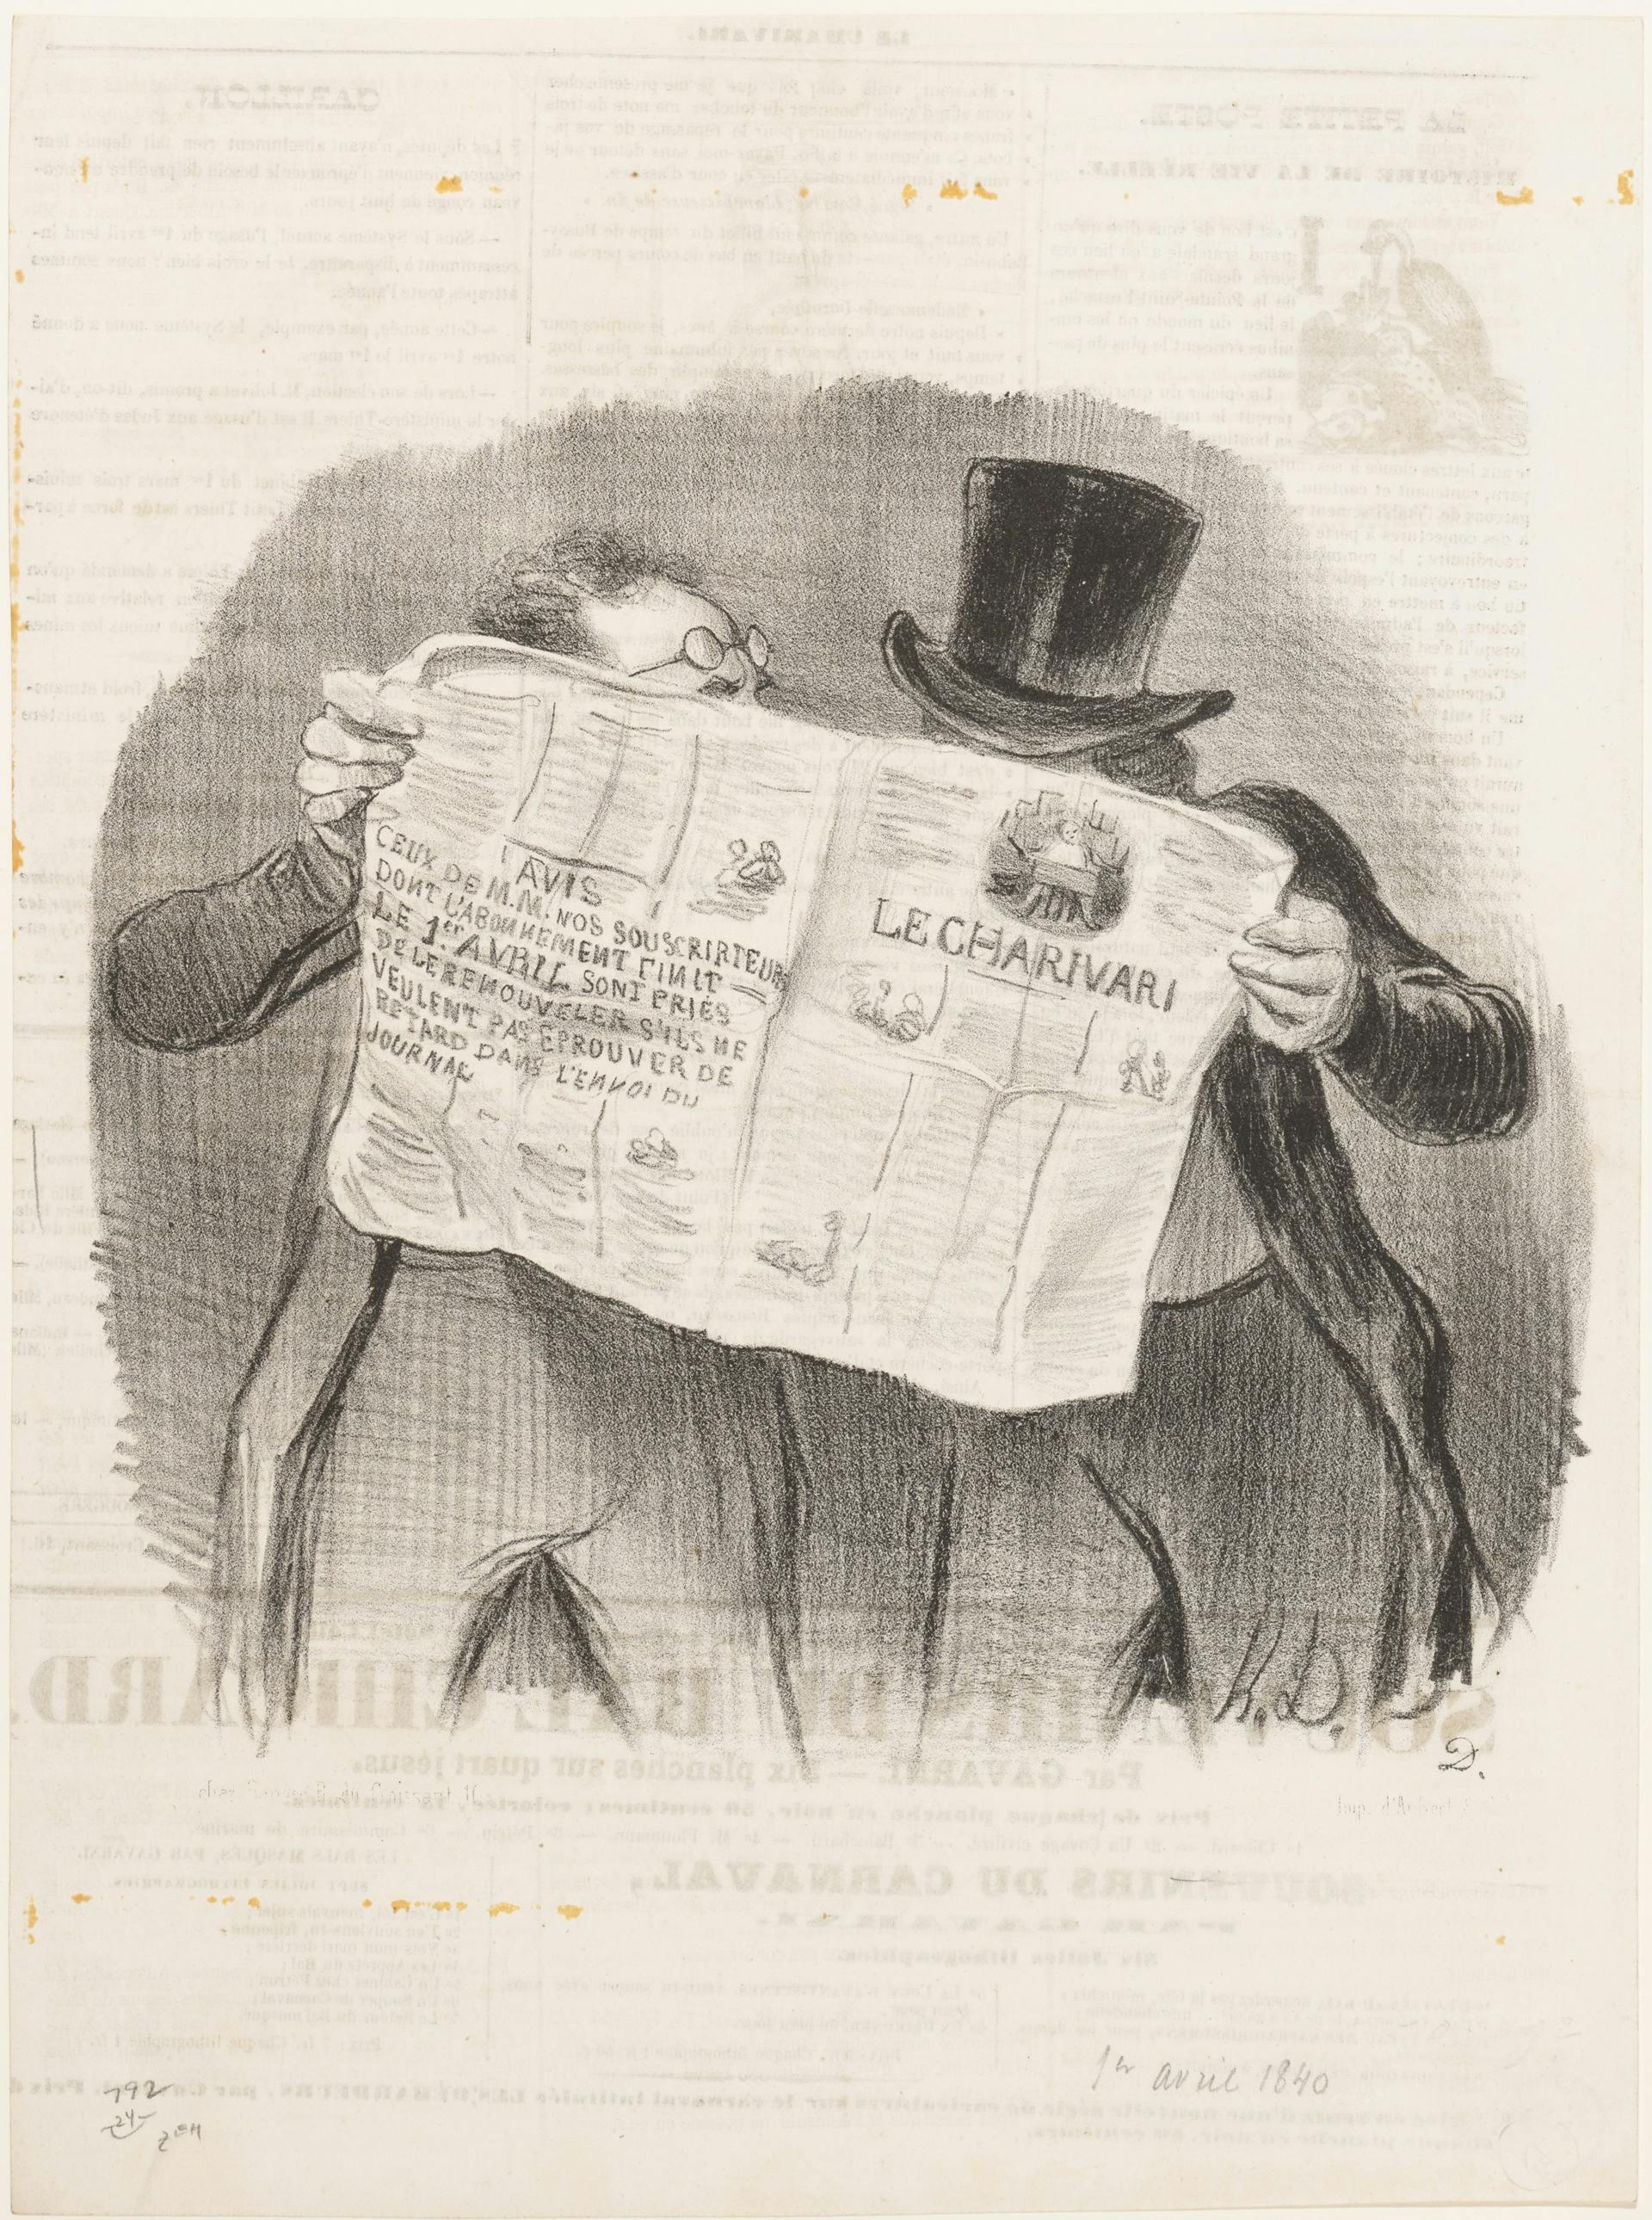 Advice to Subscribers, published in Le Charivari, April 1, 1840